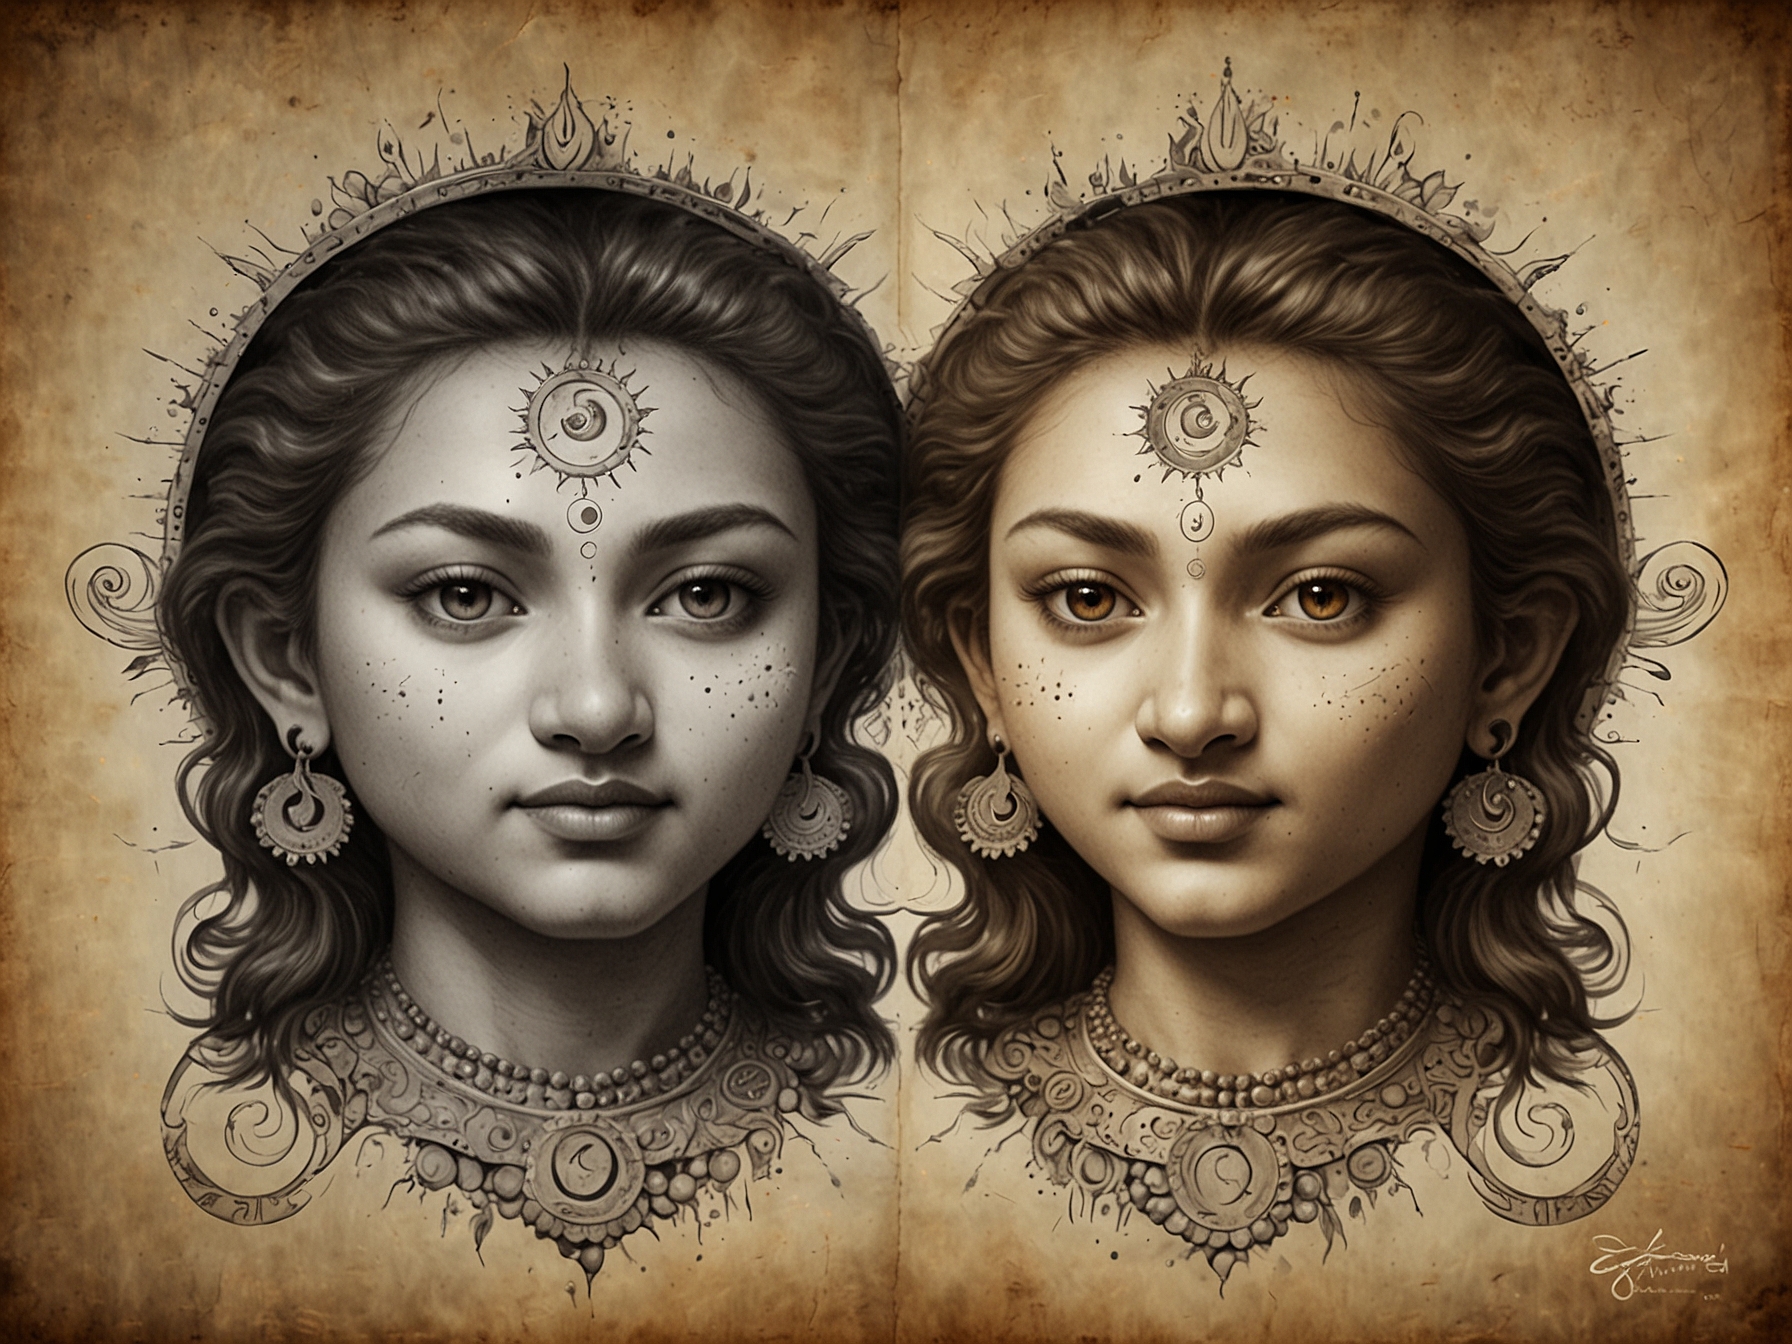 A radiant depiction of the Sun (Surya) and Moon (Chandra) with symbolic representations of their astrological significance in shaping an individual's core identity and emotional responses.